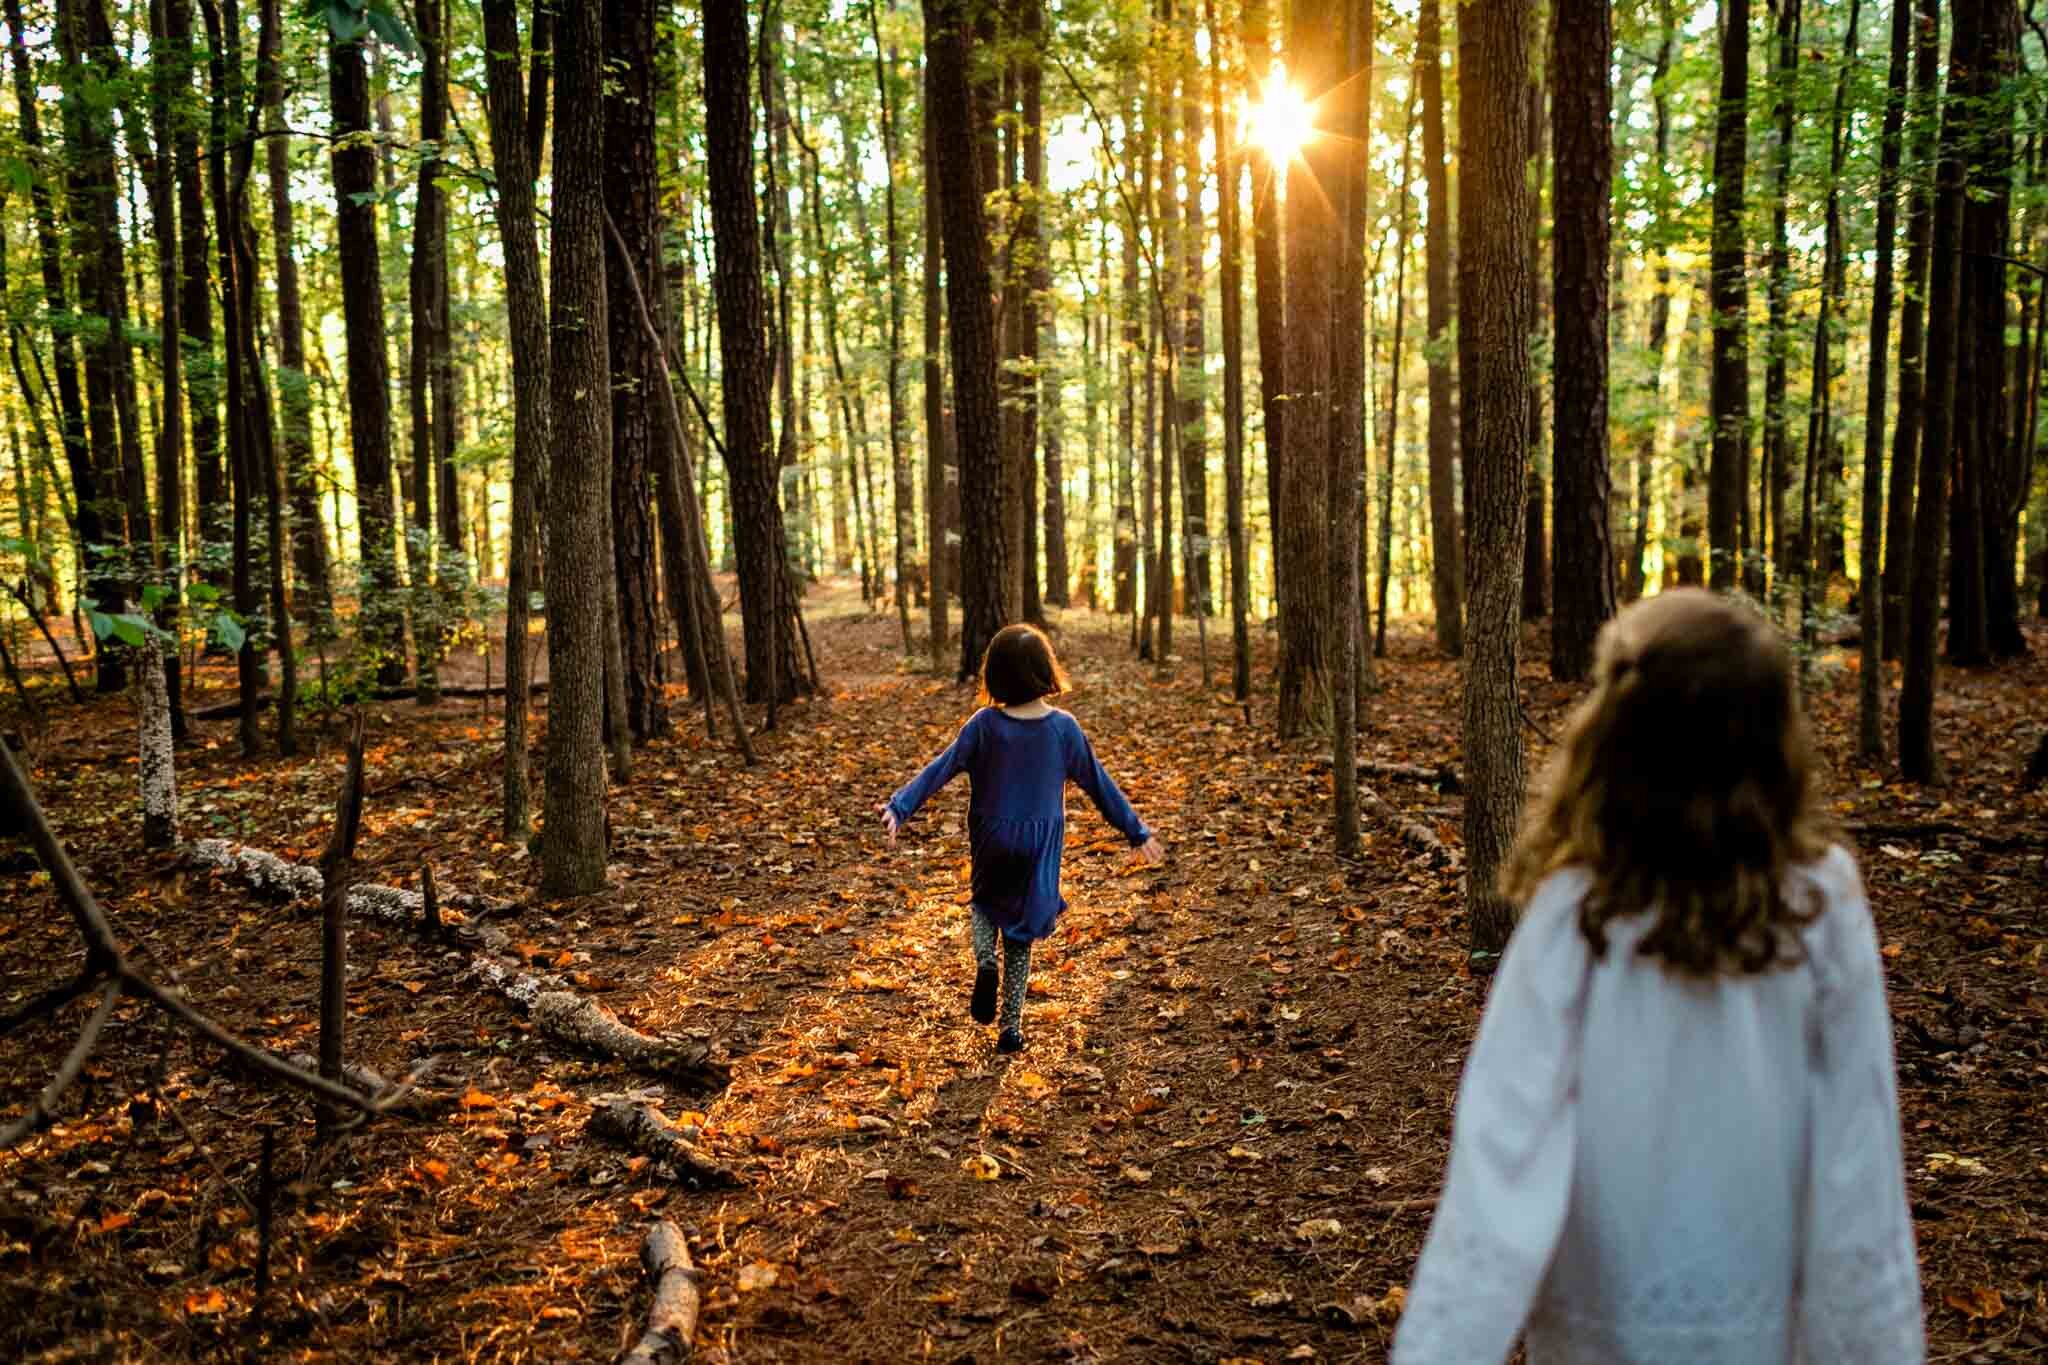 Raleigh Family Photographer | Umstead Park | By G. Lin Photography | Girl running towards sunset in forest